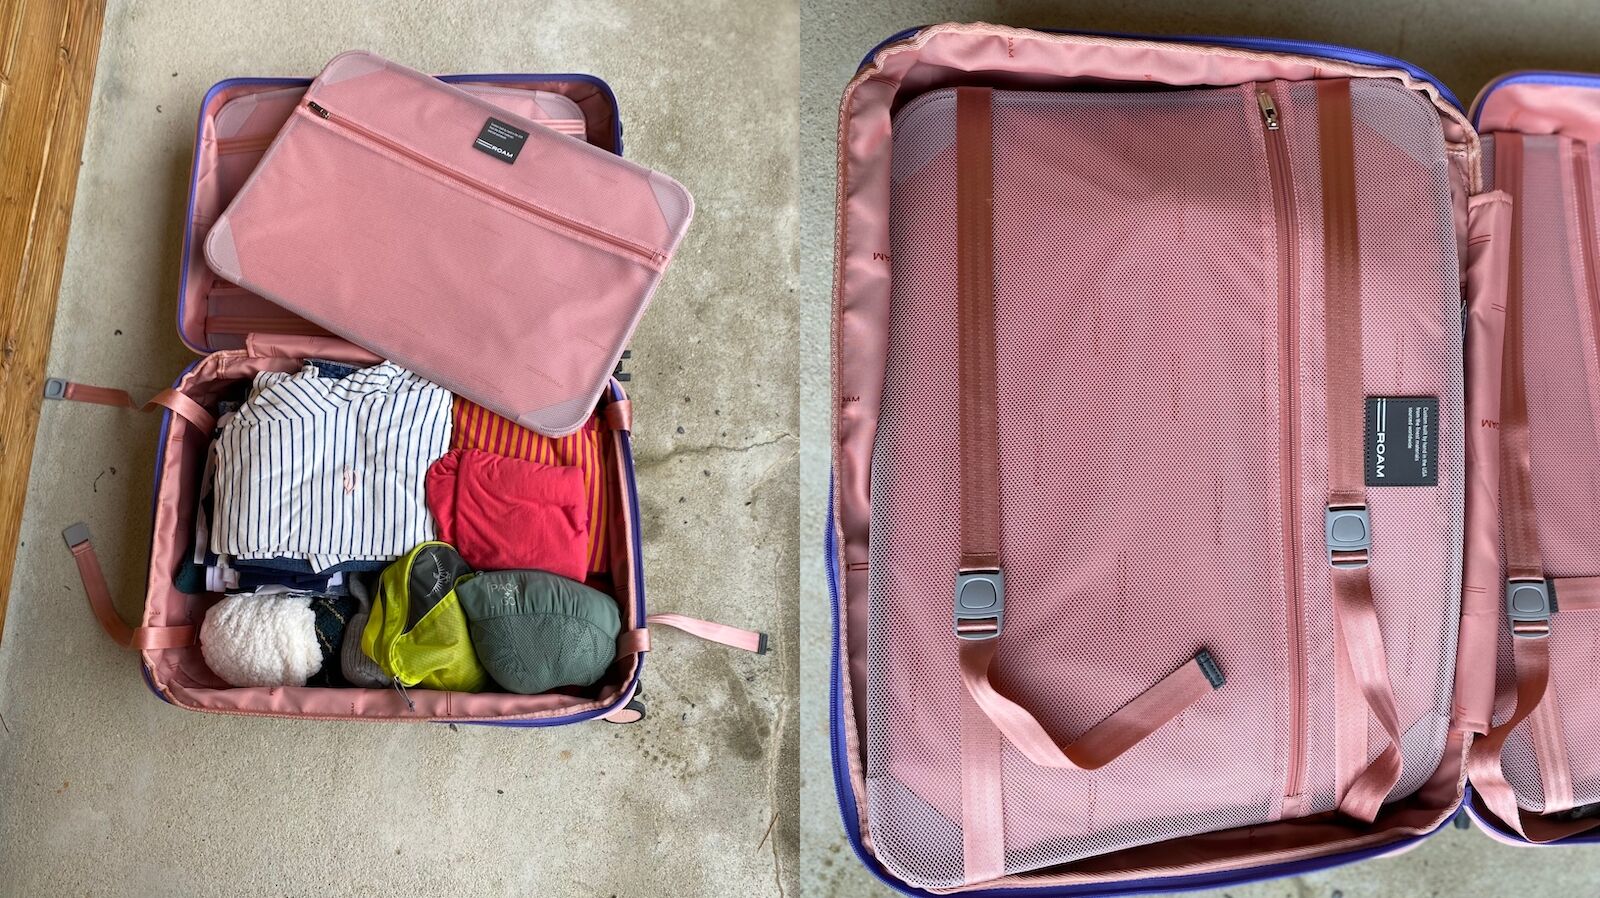 The compression boards on the Check-In Expendable suitcase by Roam Luggage